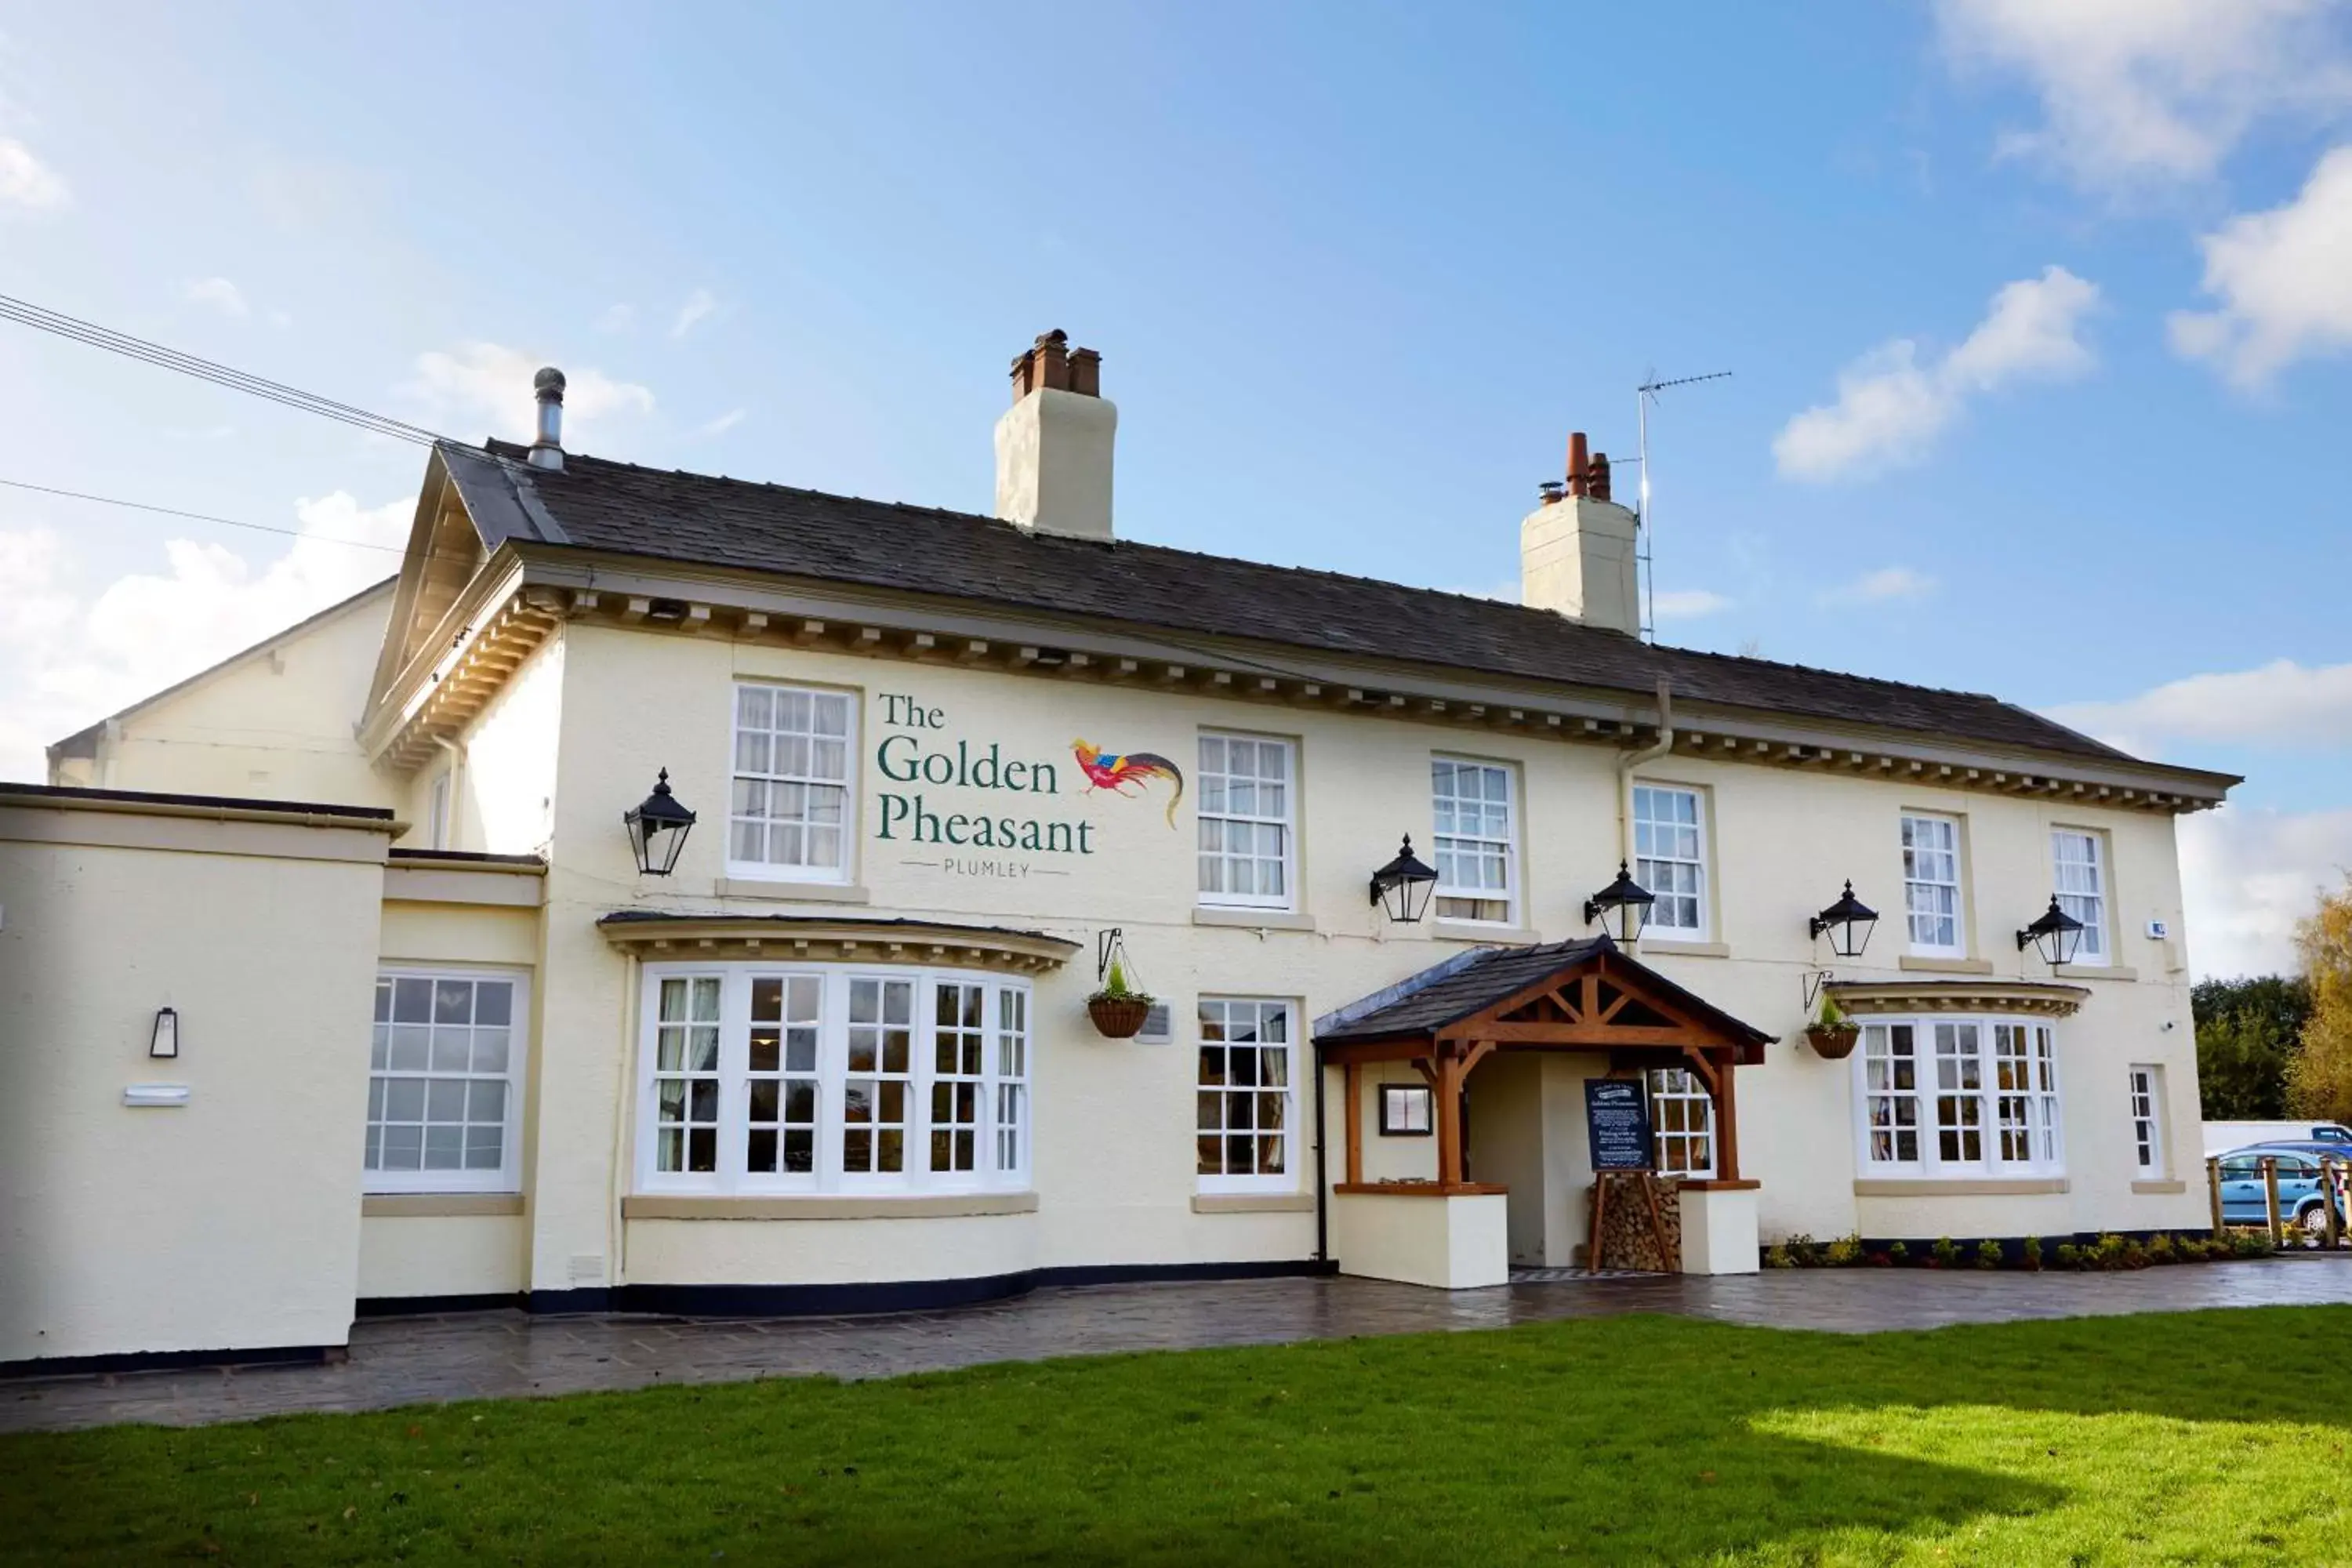 Property building in The Golden Pheasant